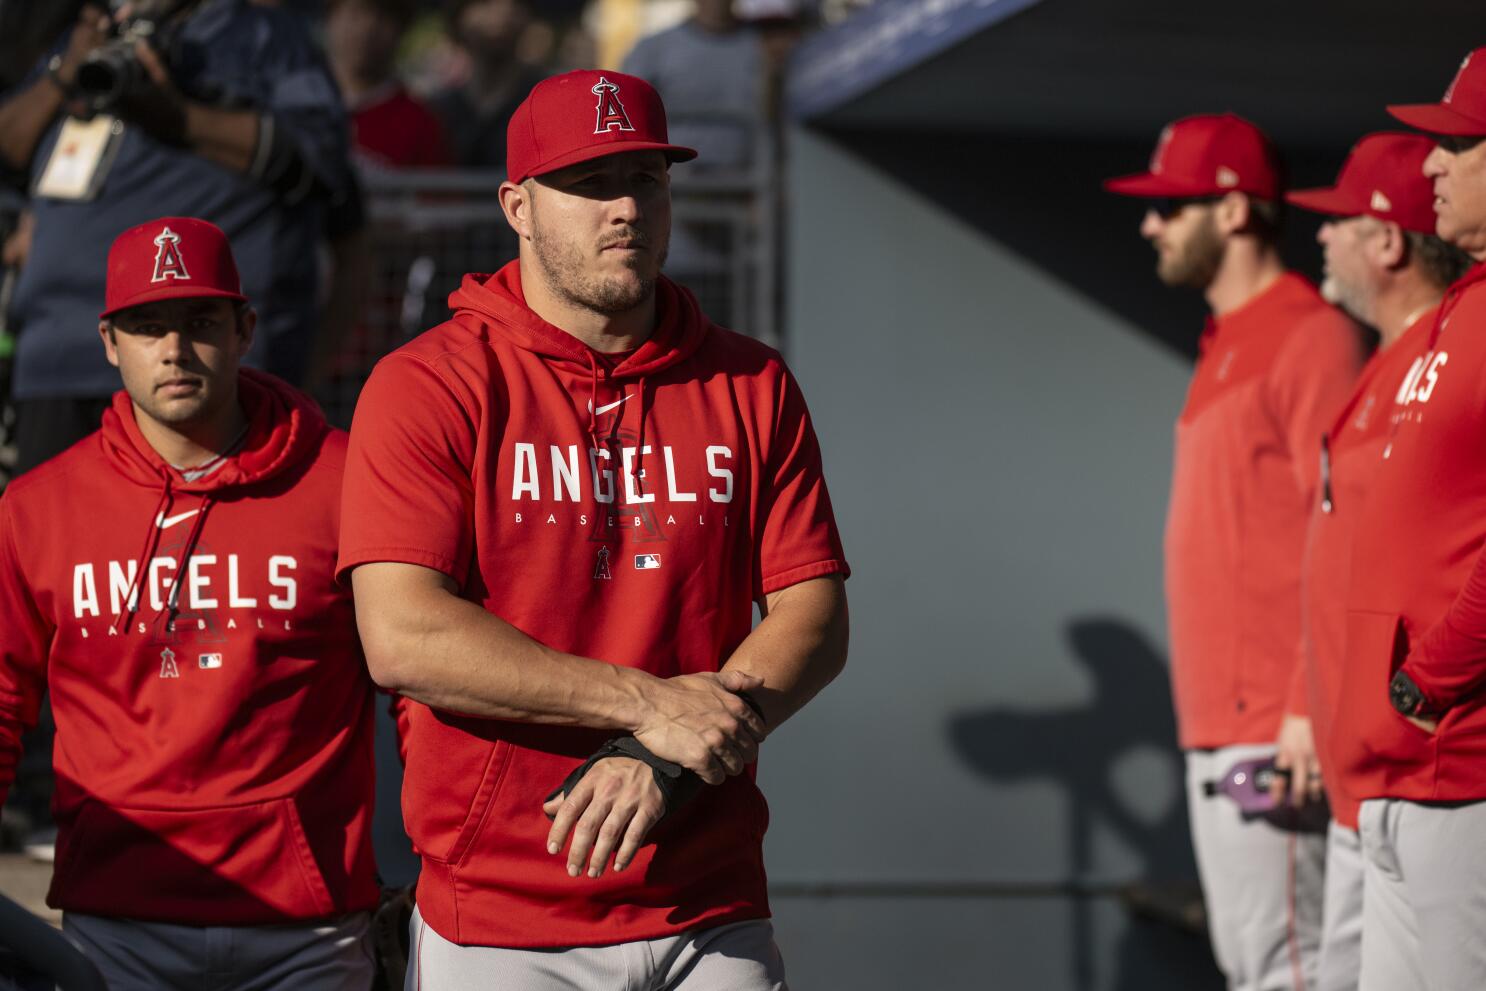 Mike Trout Injury Update: When Will the Angels' Star Be Back?